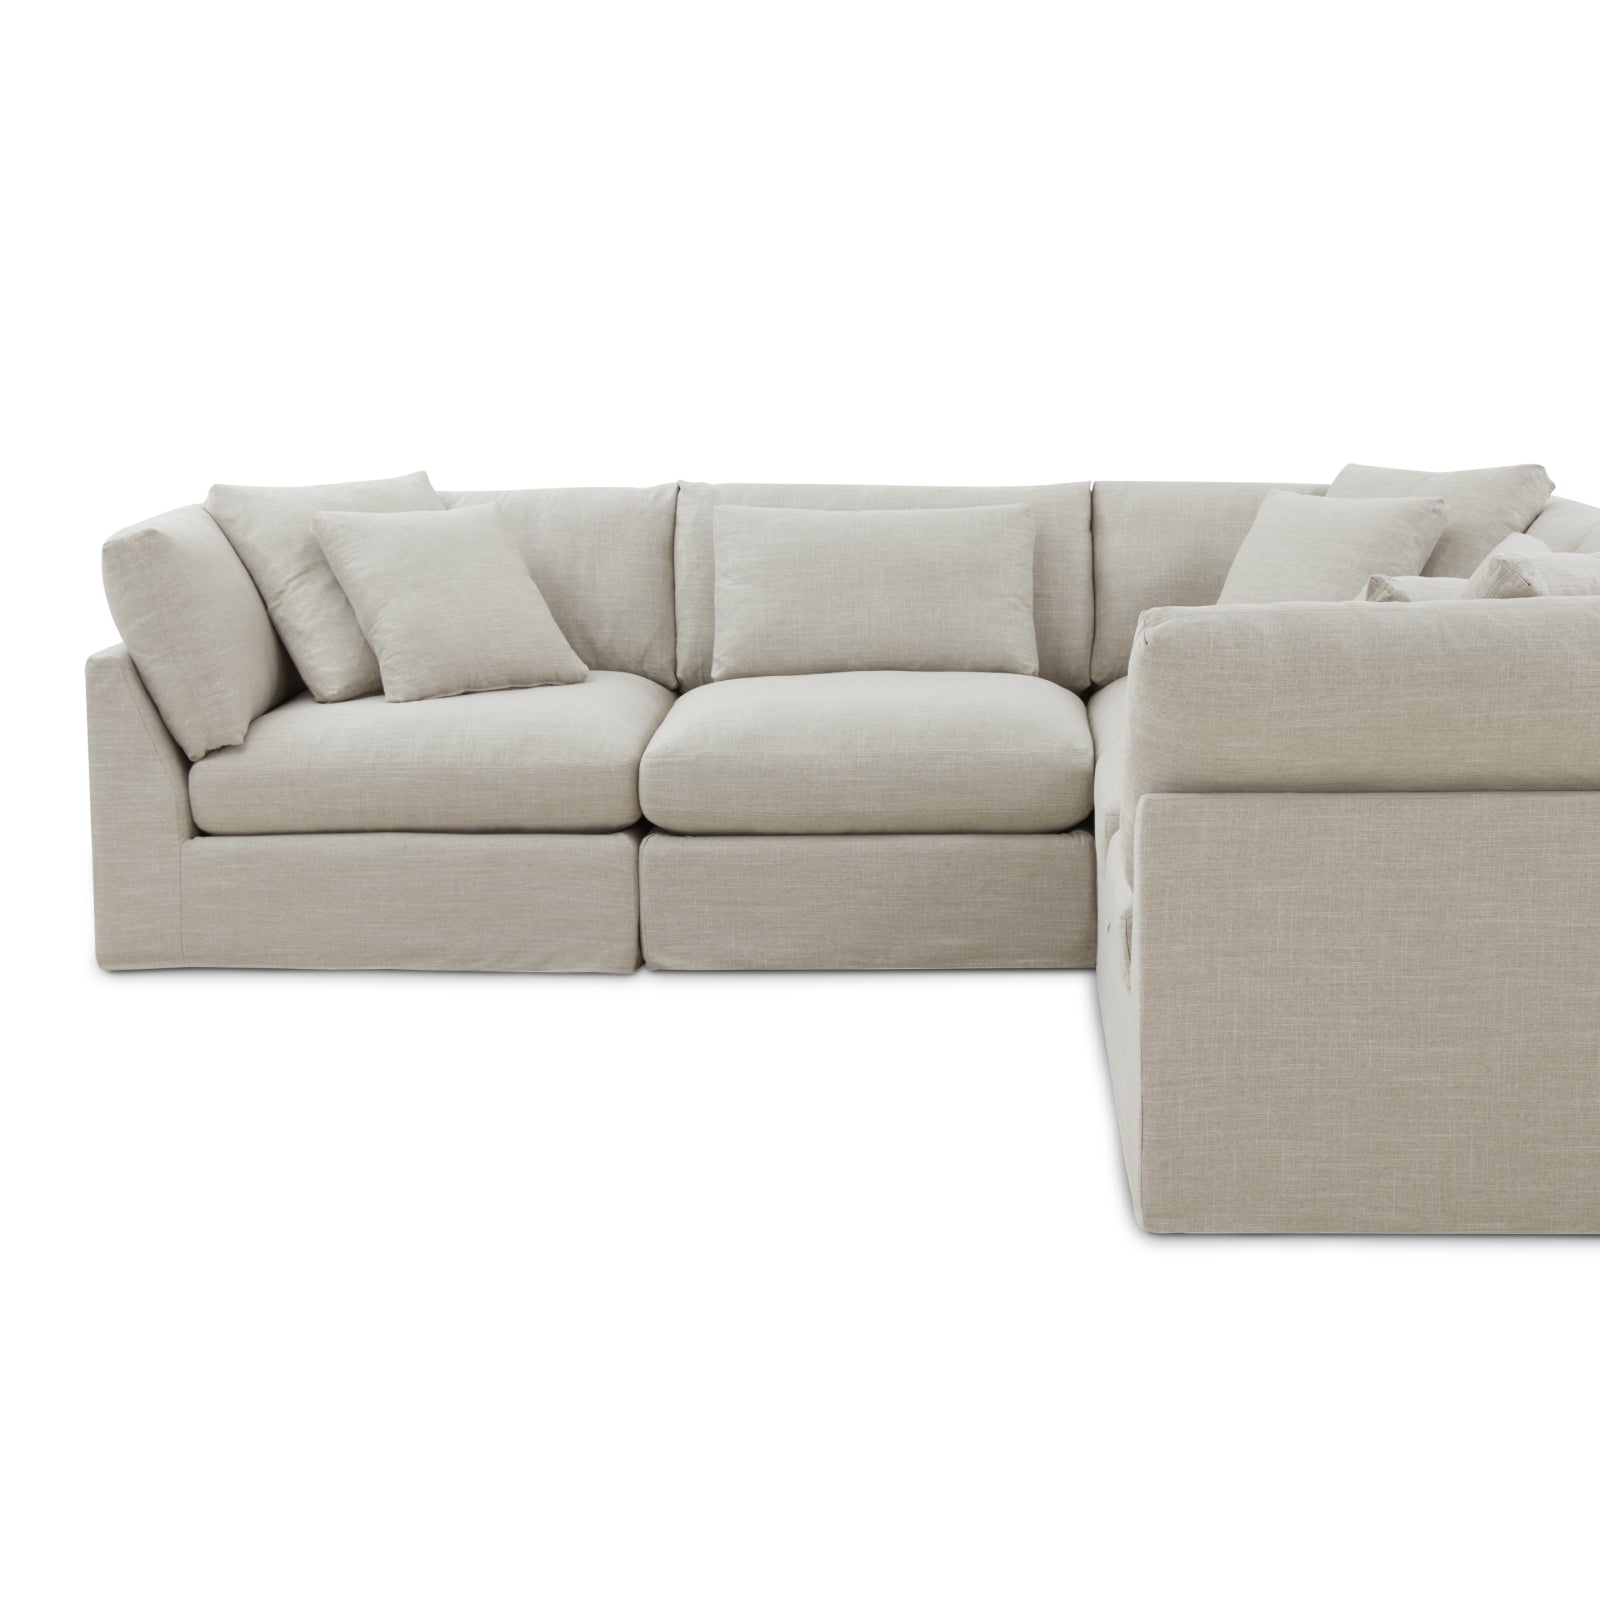 Get Together™ 5-Piece Modular Sectional Closed, Large, Light Pebble - Image 13